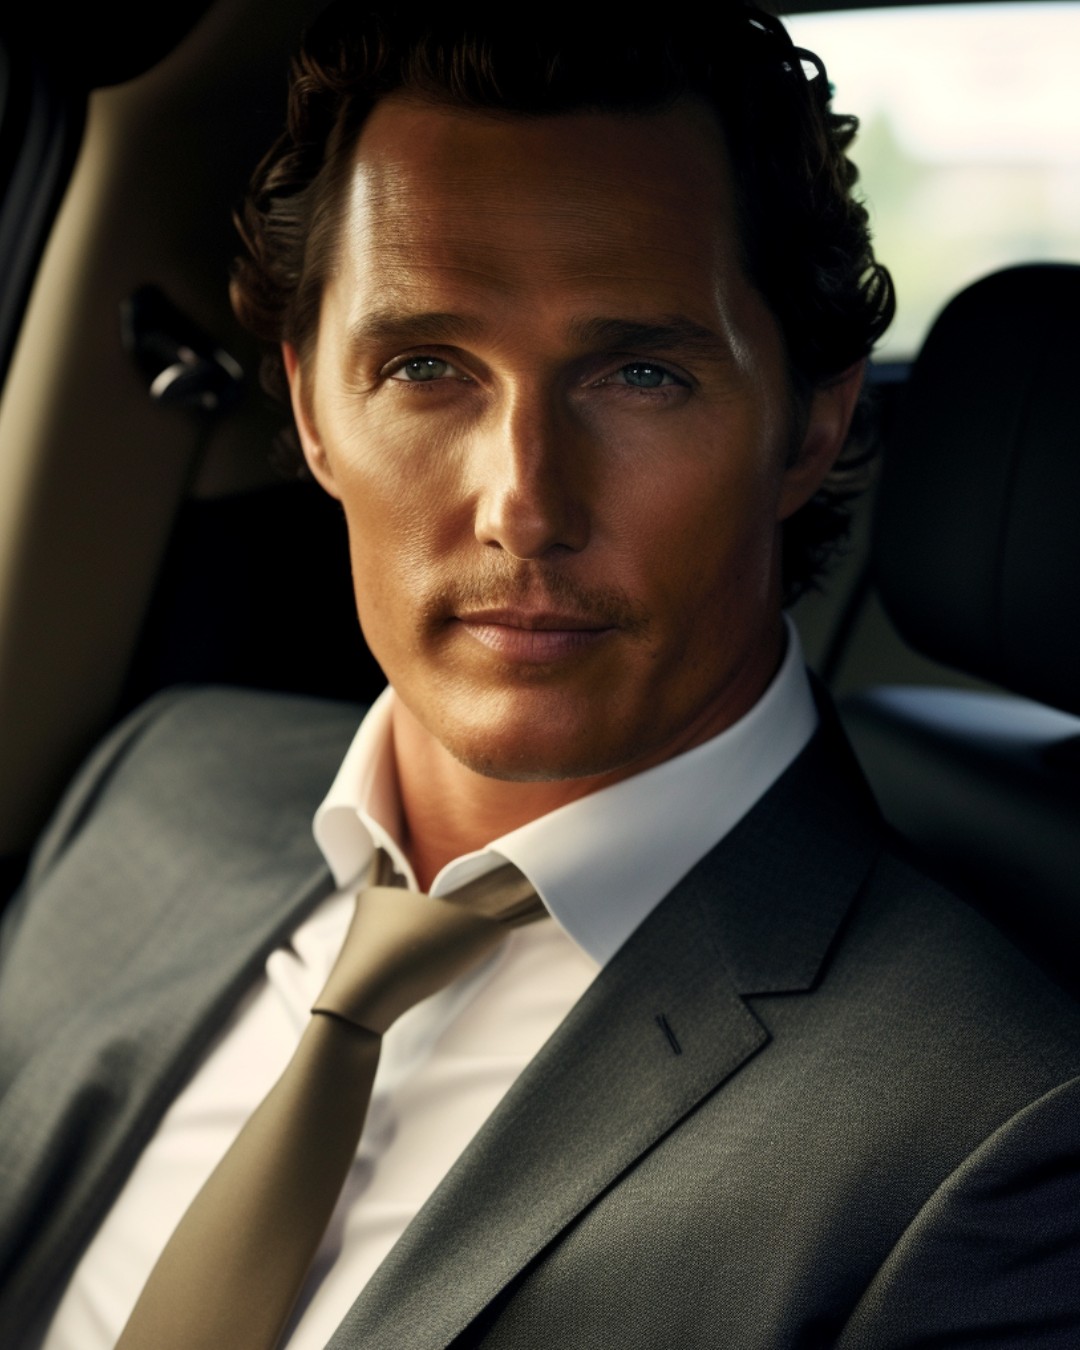 The Lincoln Lawyer Starring Matthew McConaughey (Book and Movie Review)